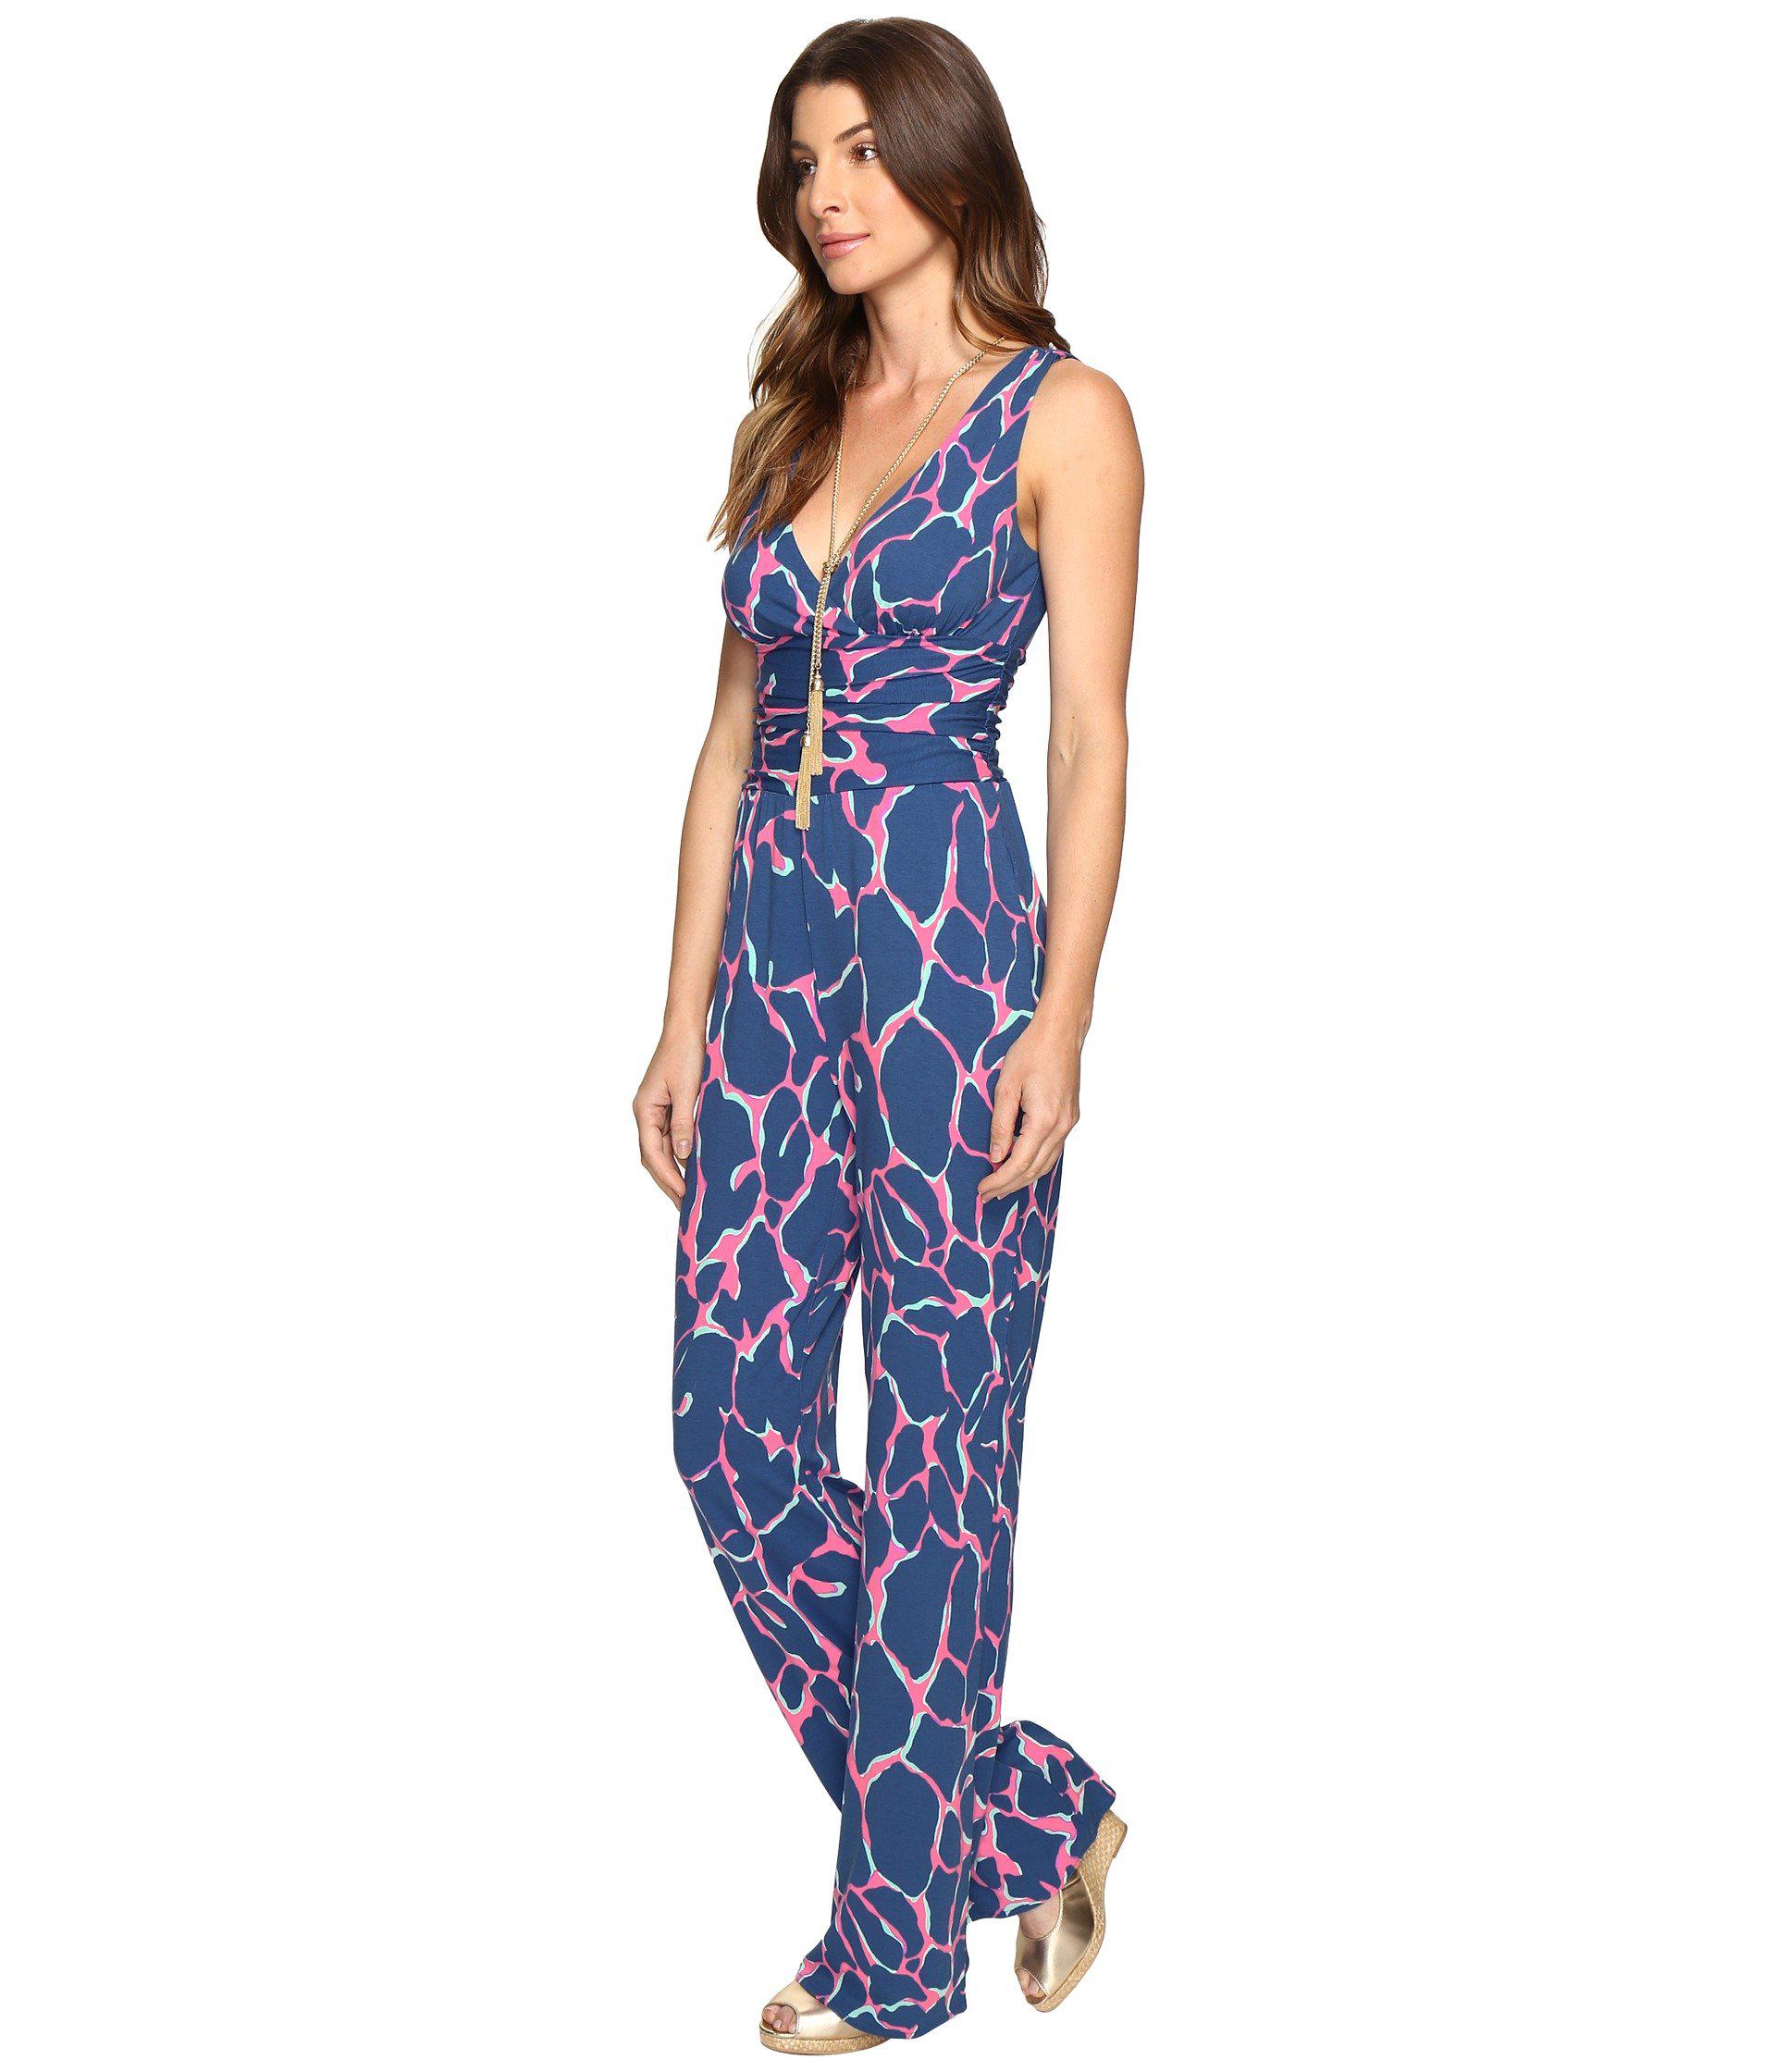 Lyst - Lilly Pulitzer Sloane Jumpsuit in Blue